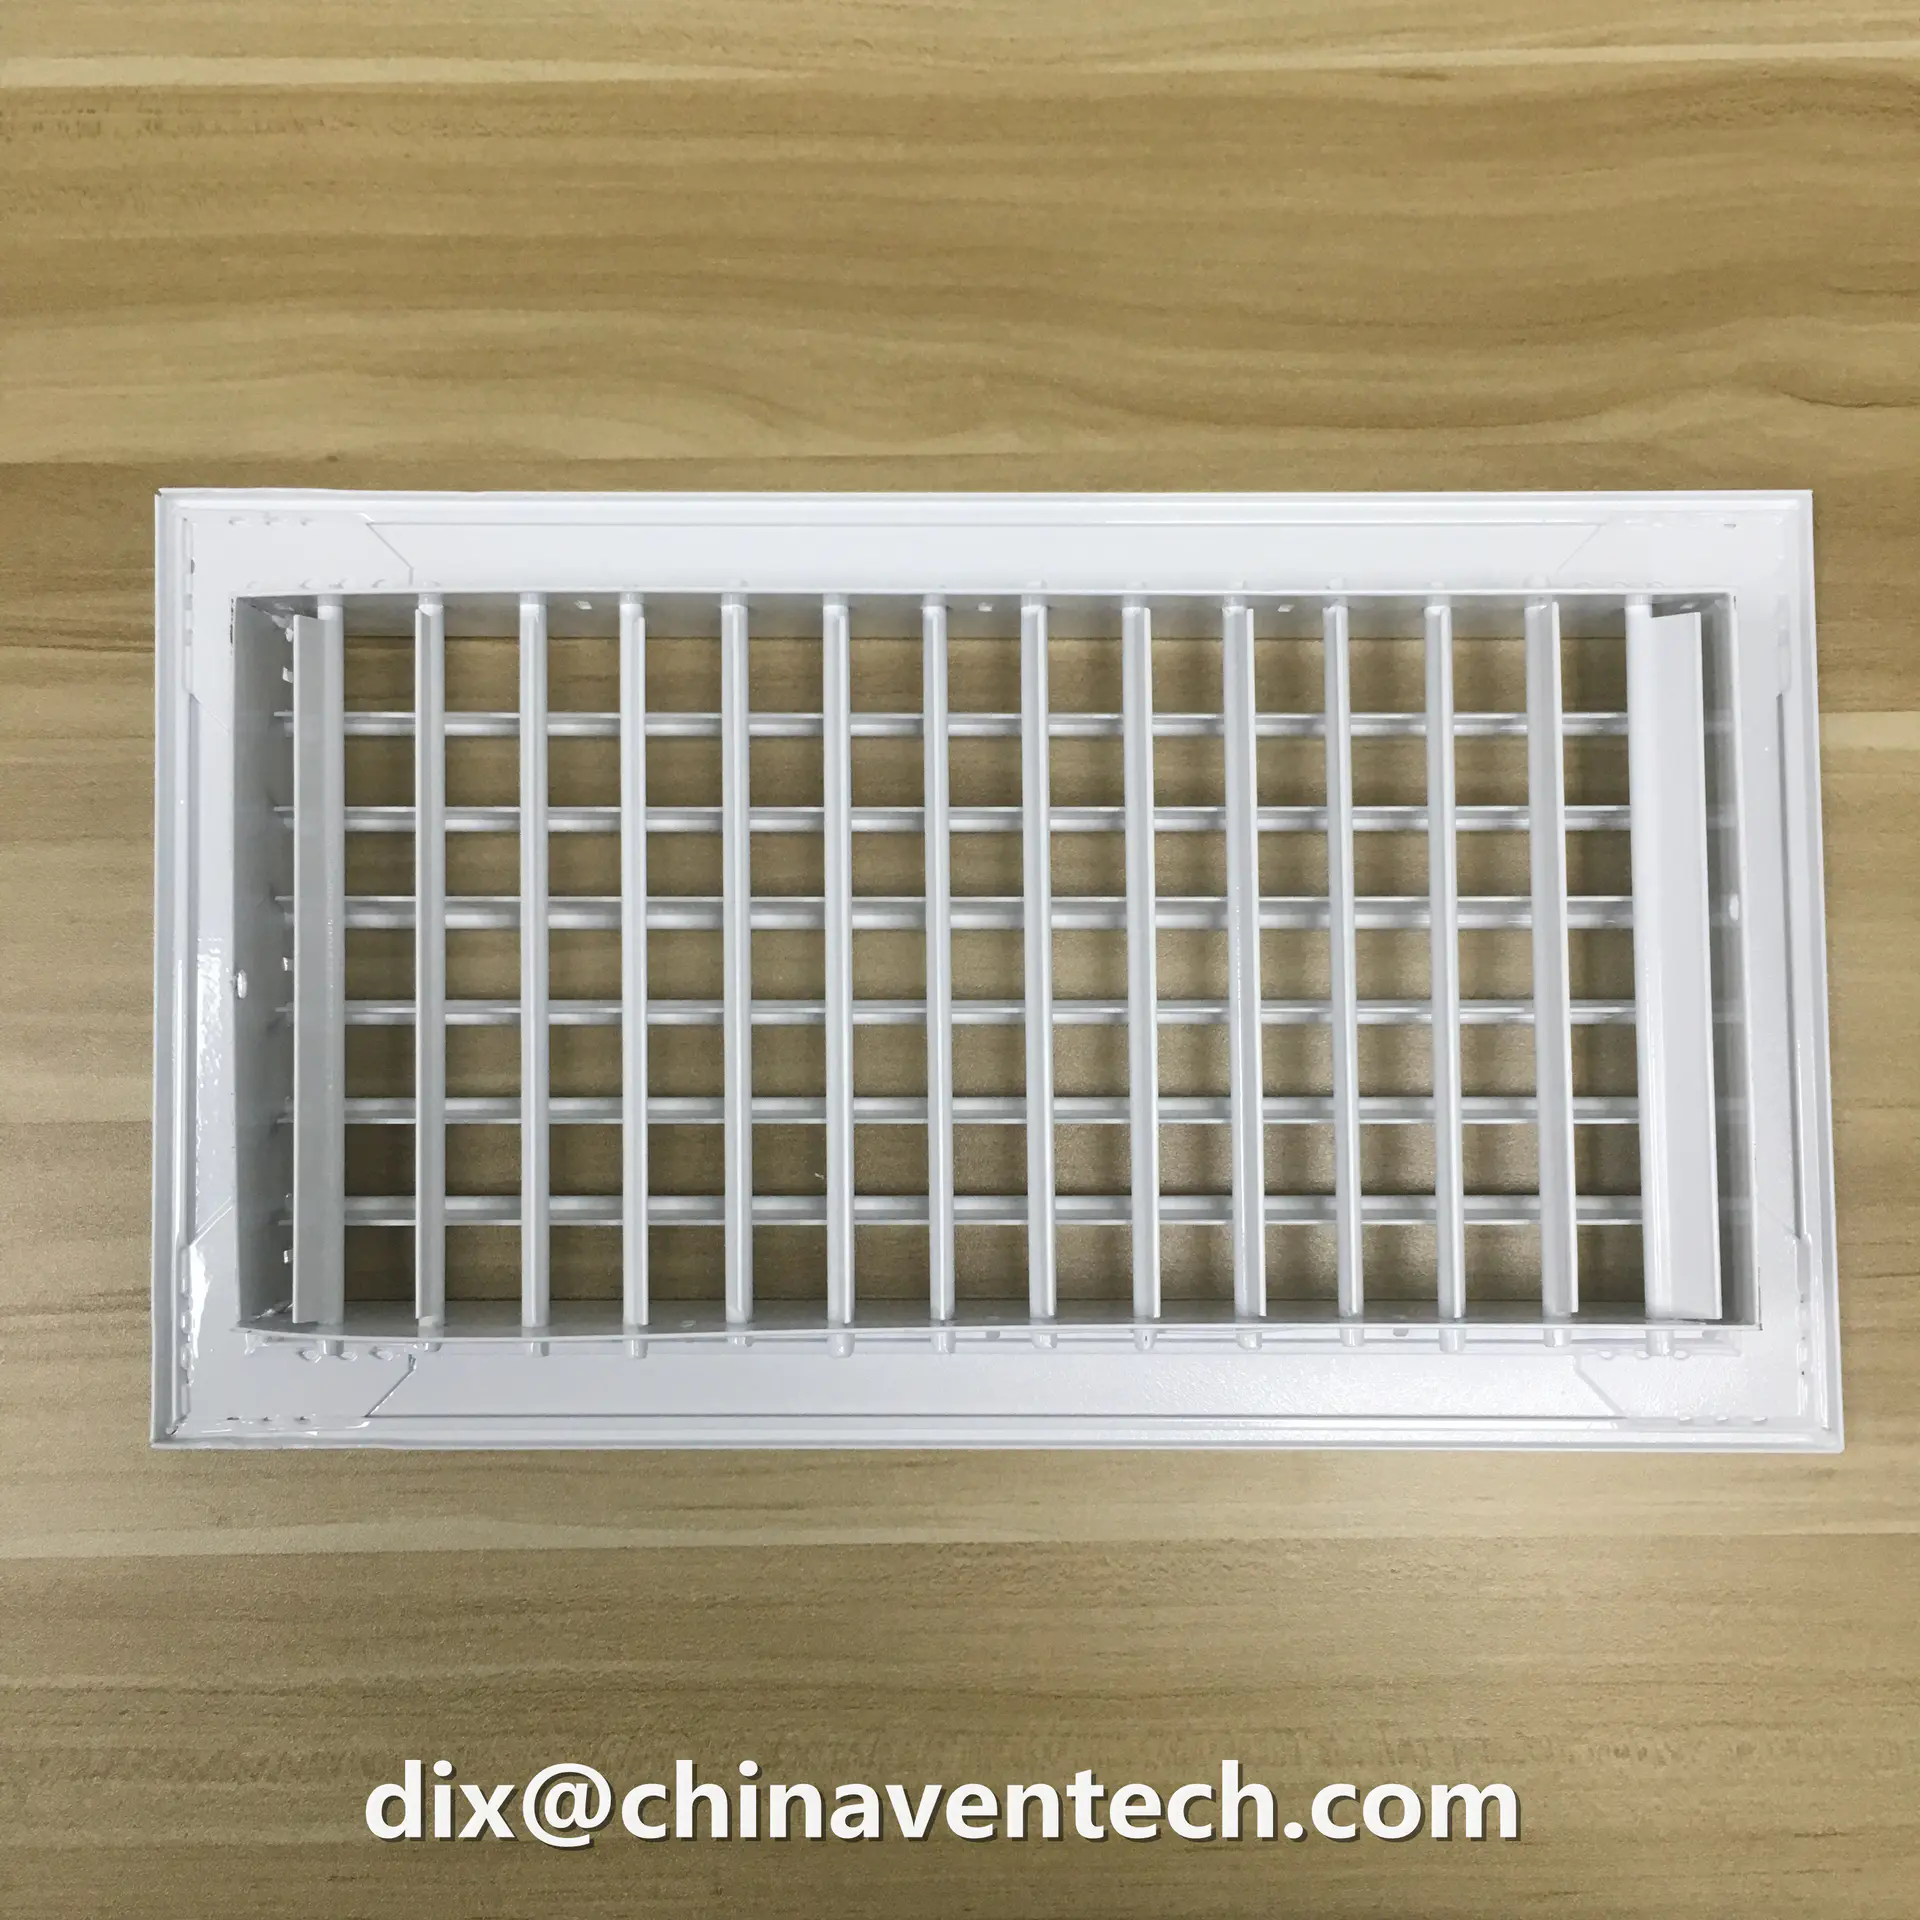 Ventech Hvac system ceiling mounted aluminum supply air grille double deflection register